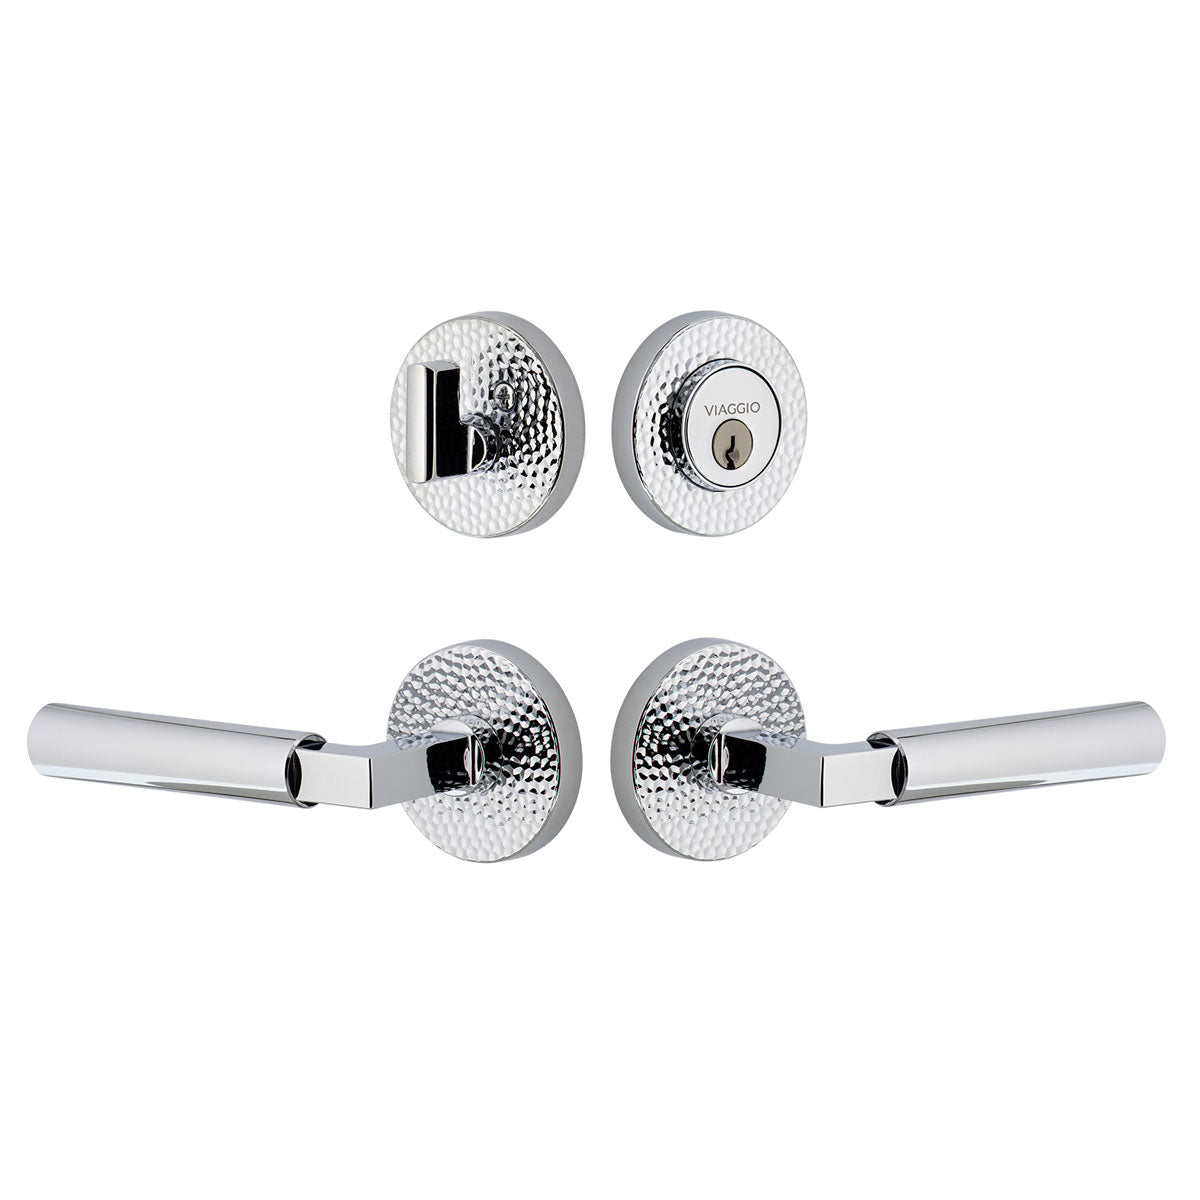 Circolo Hammered Rosette Entry Set with Contempo Lever in Bright Chrome